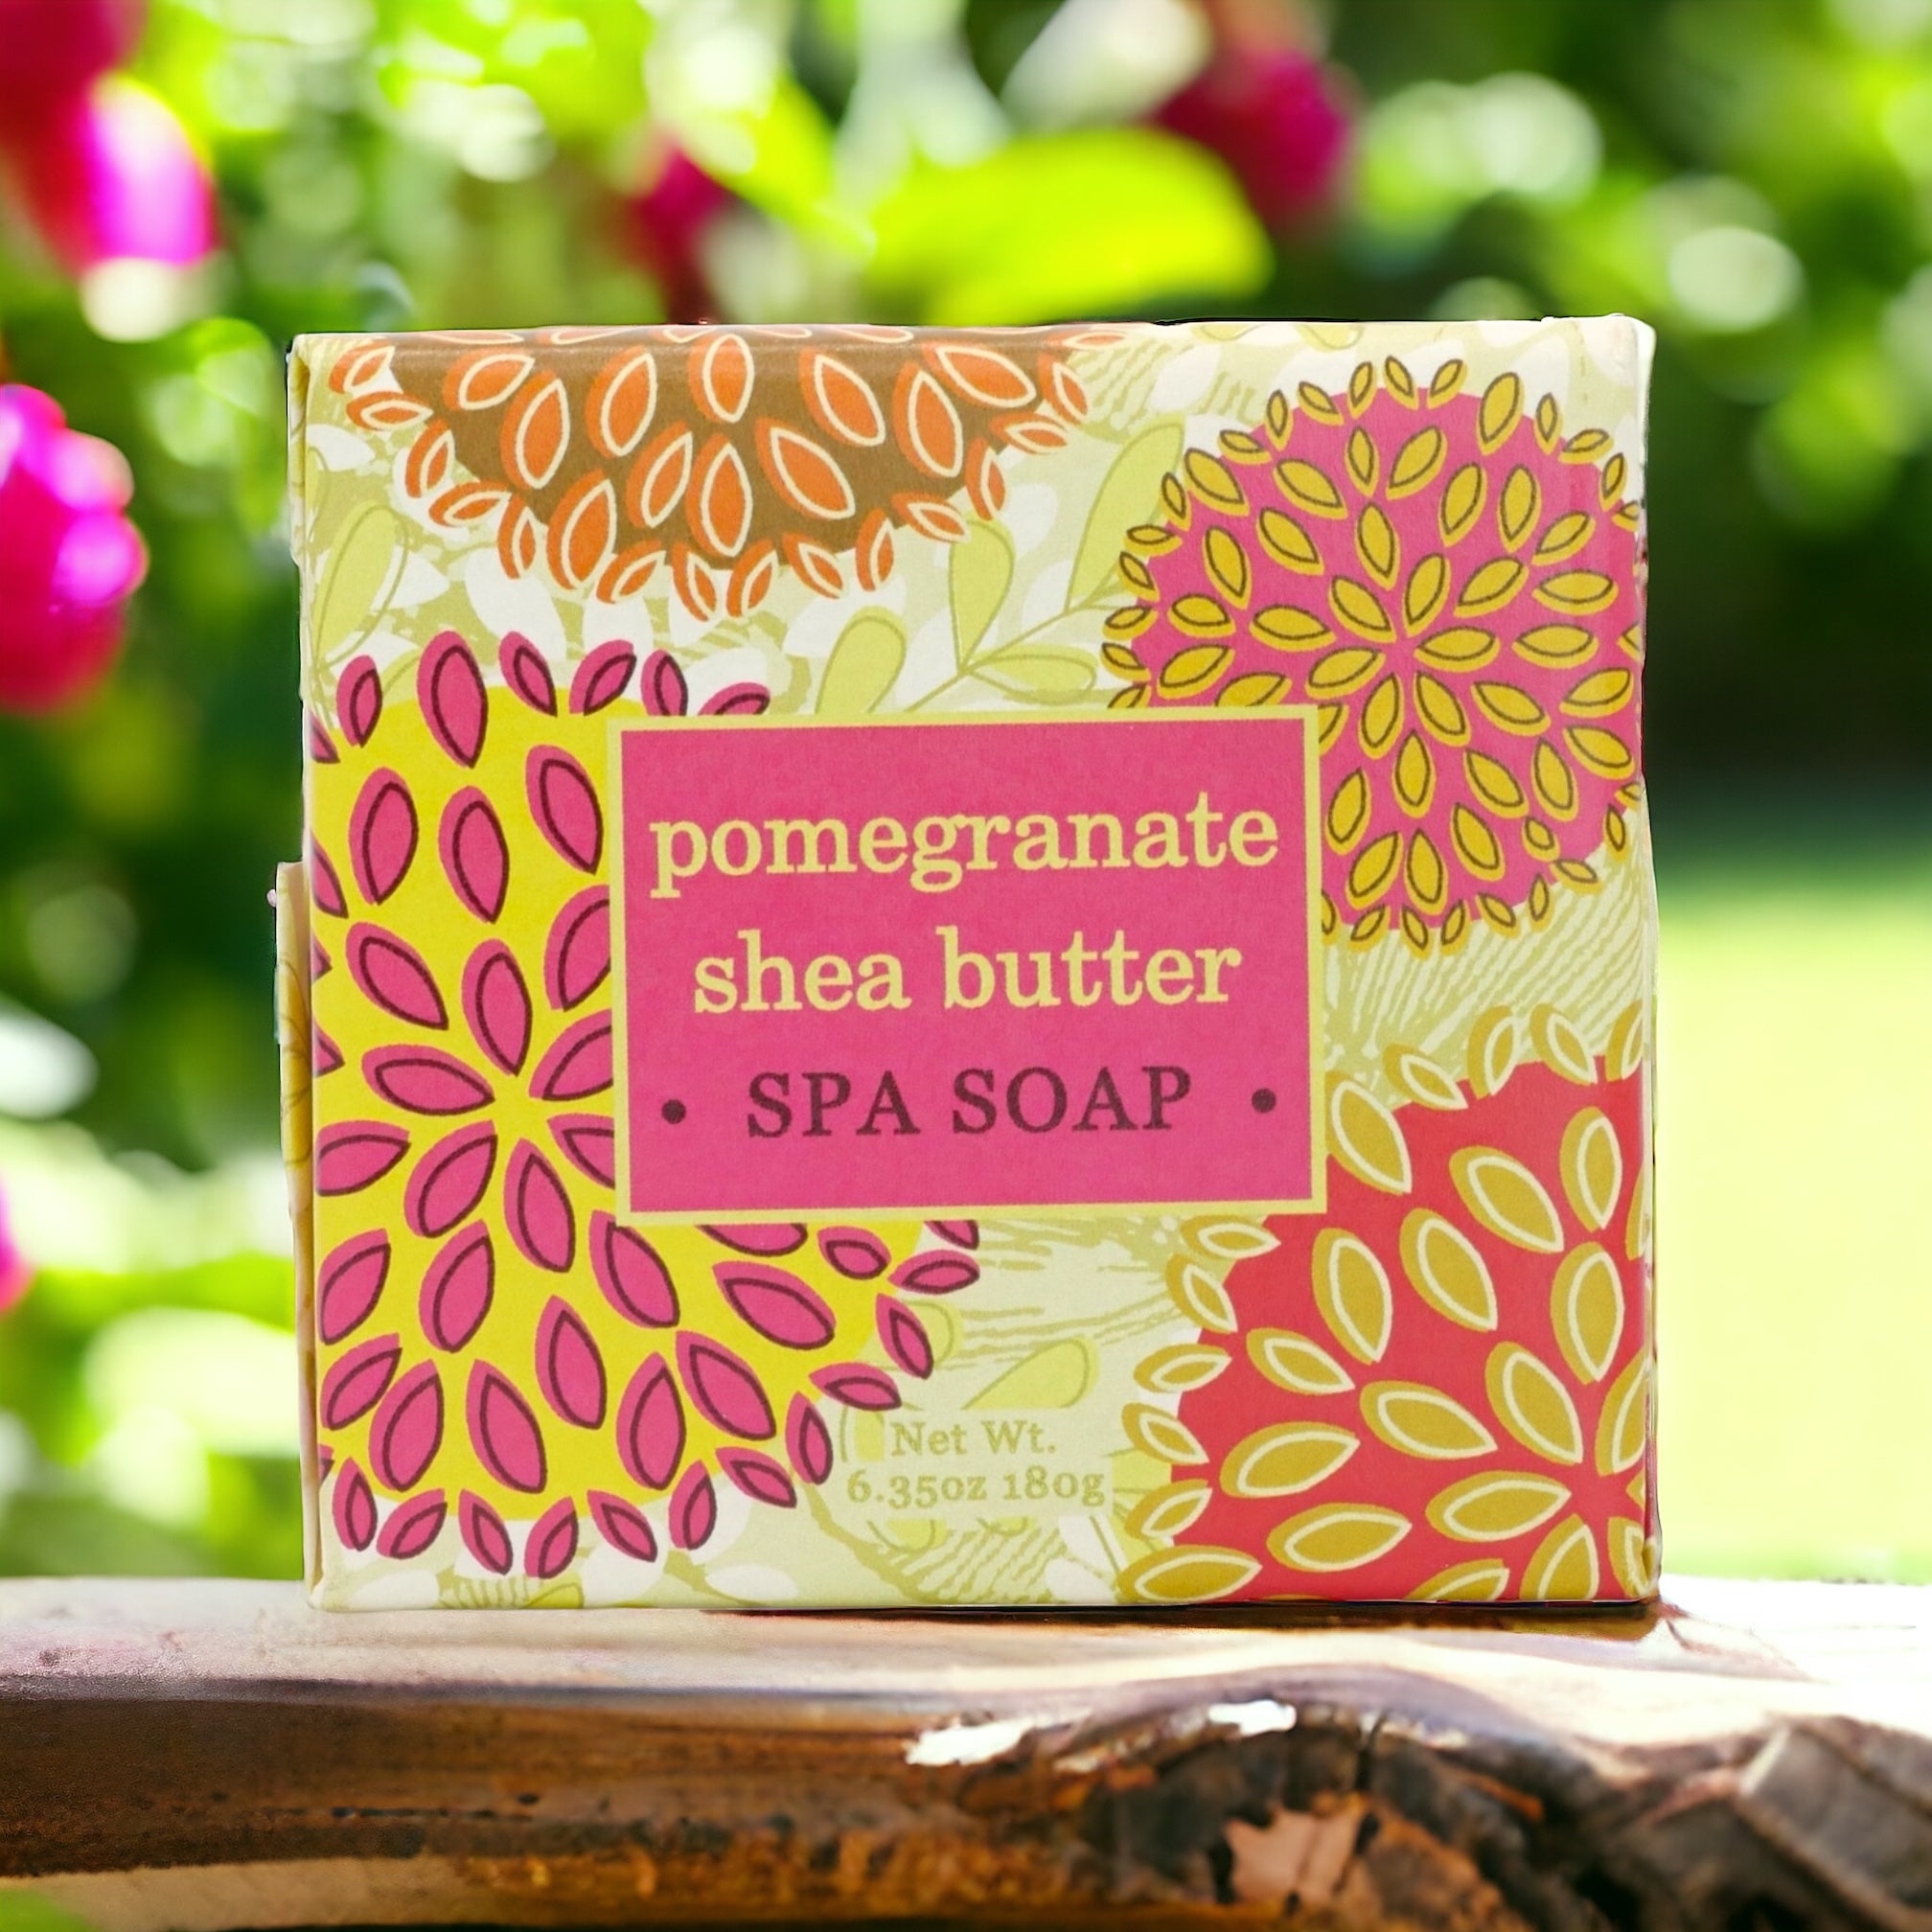 Pomegranate Shea Butter Spa Soap by Greenwich Bay Trading Co.